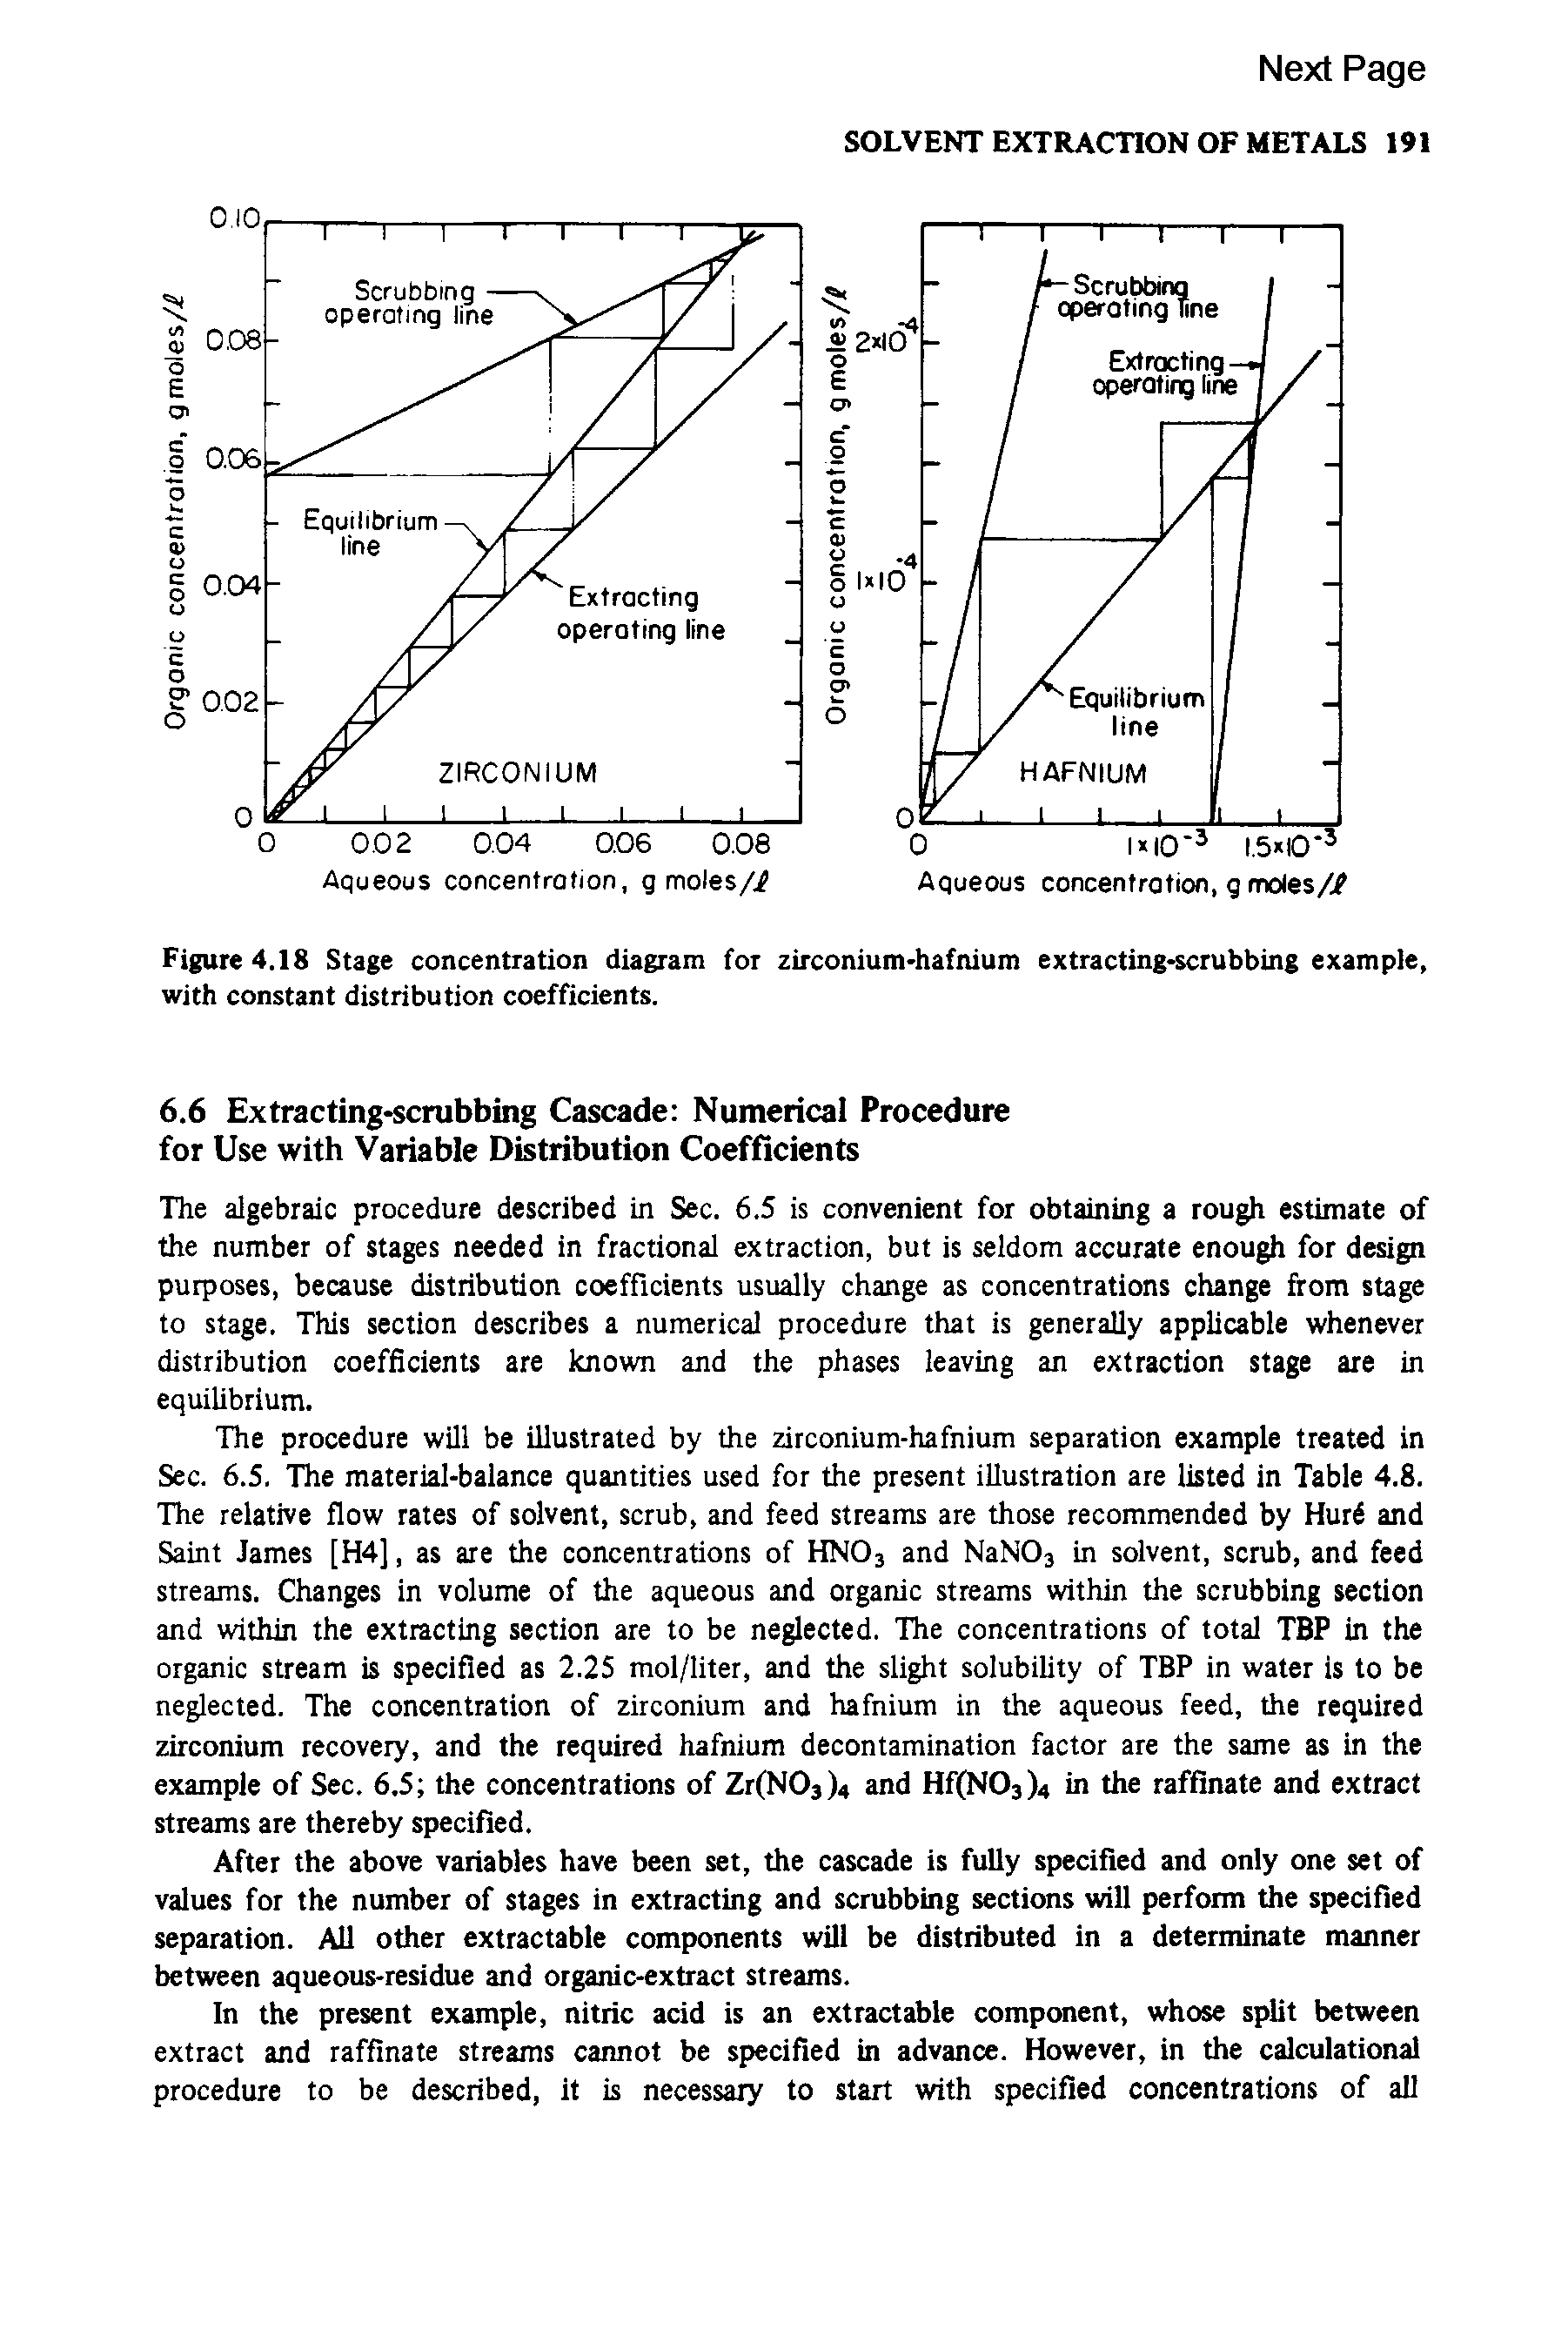 Figure 4.18 Stage concentration diagram for zirconium-hafnium extracting-scrubbing example, with constant distribution coefficients.